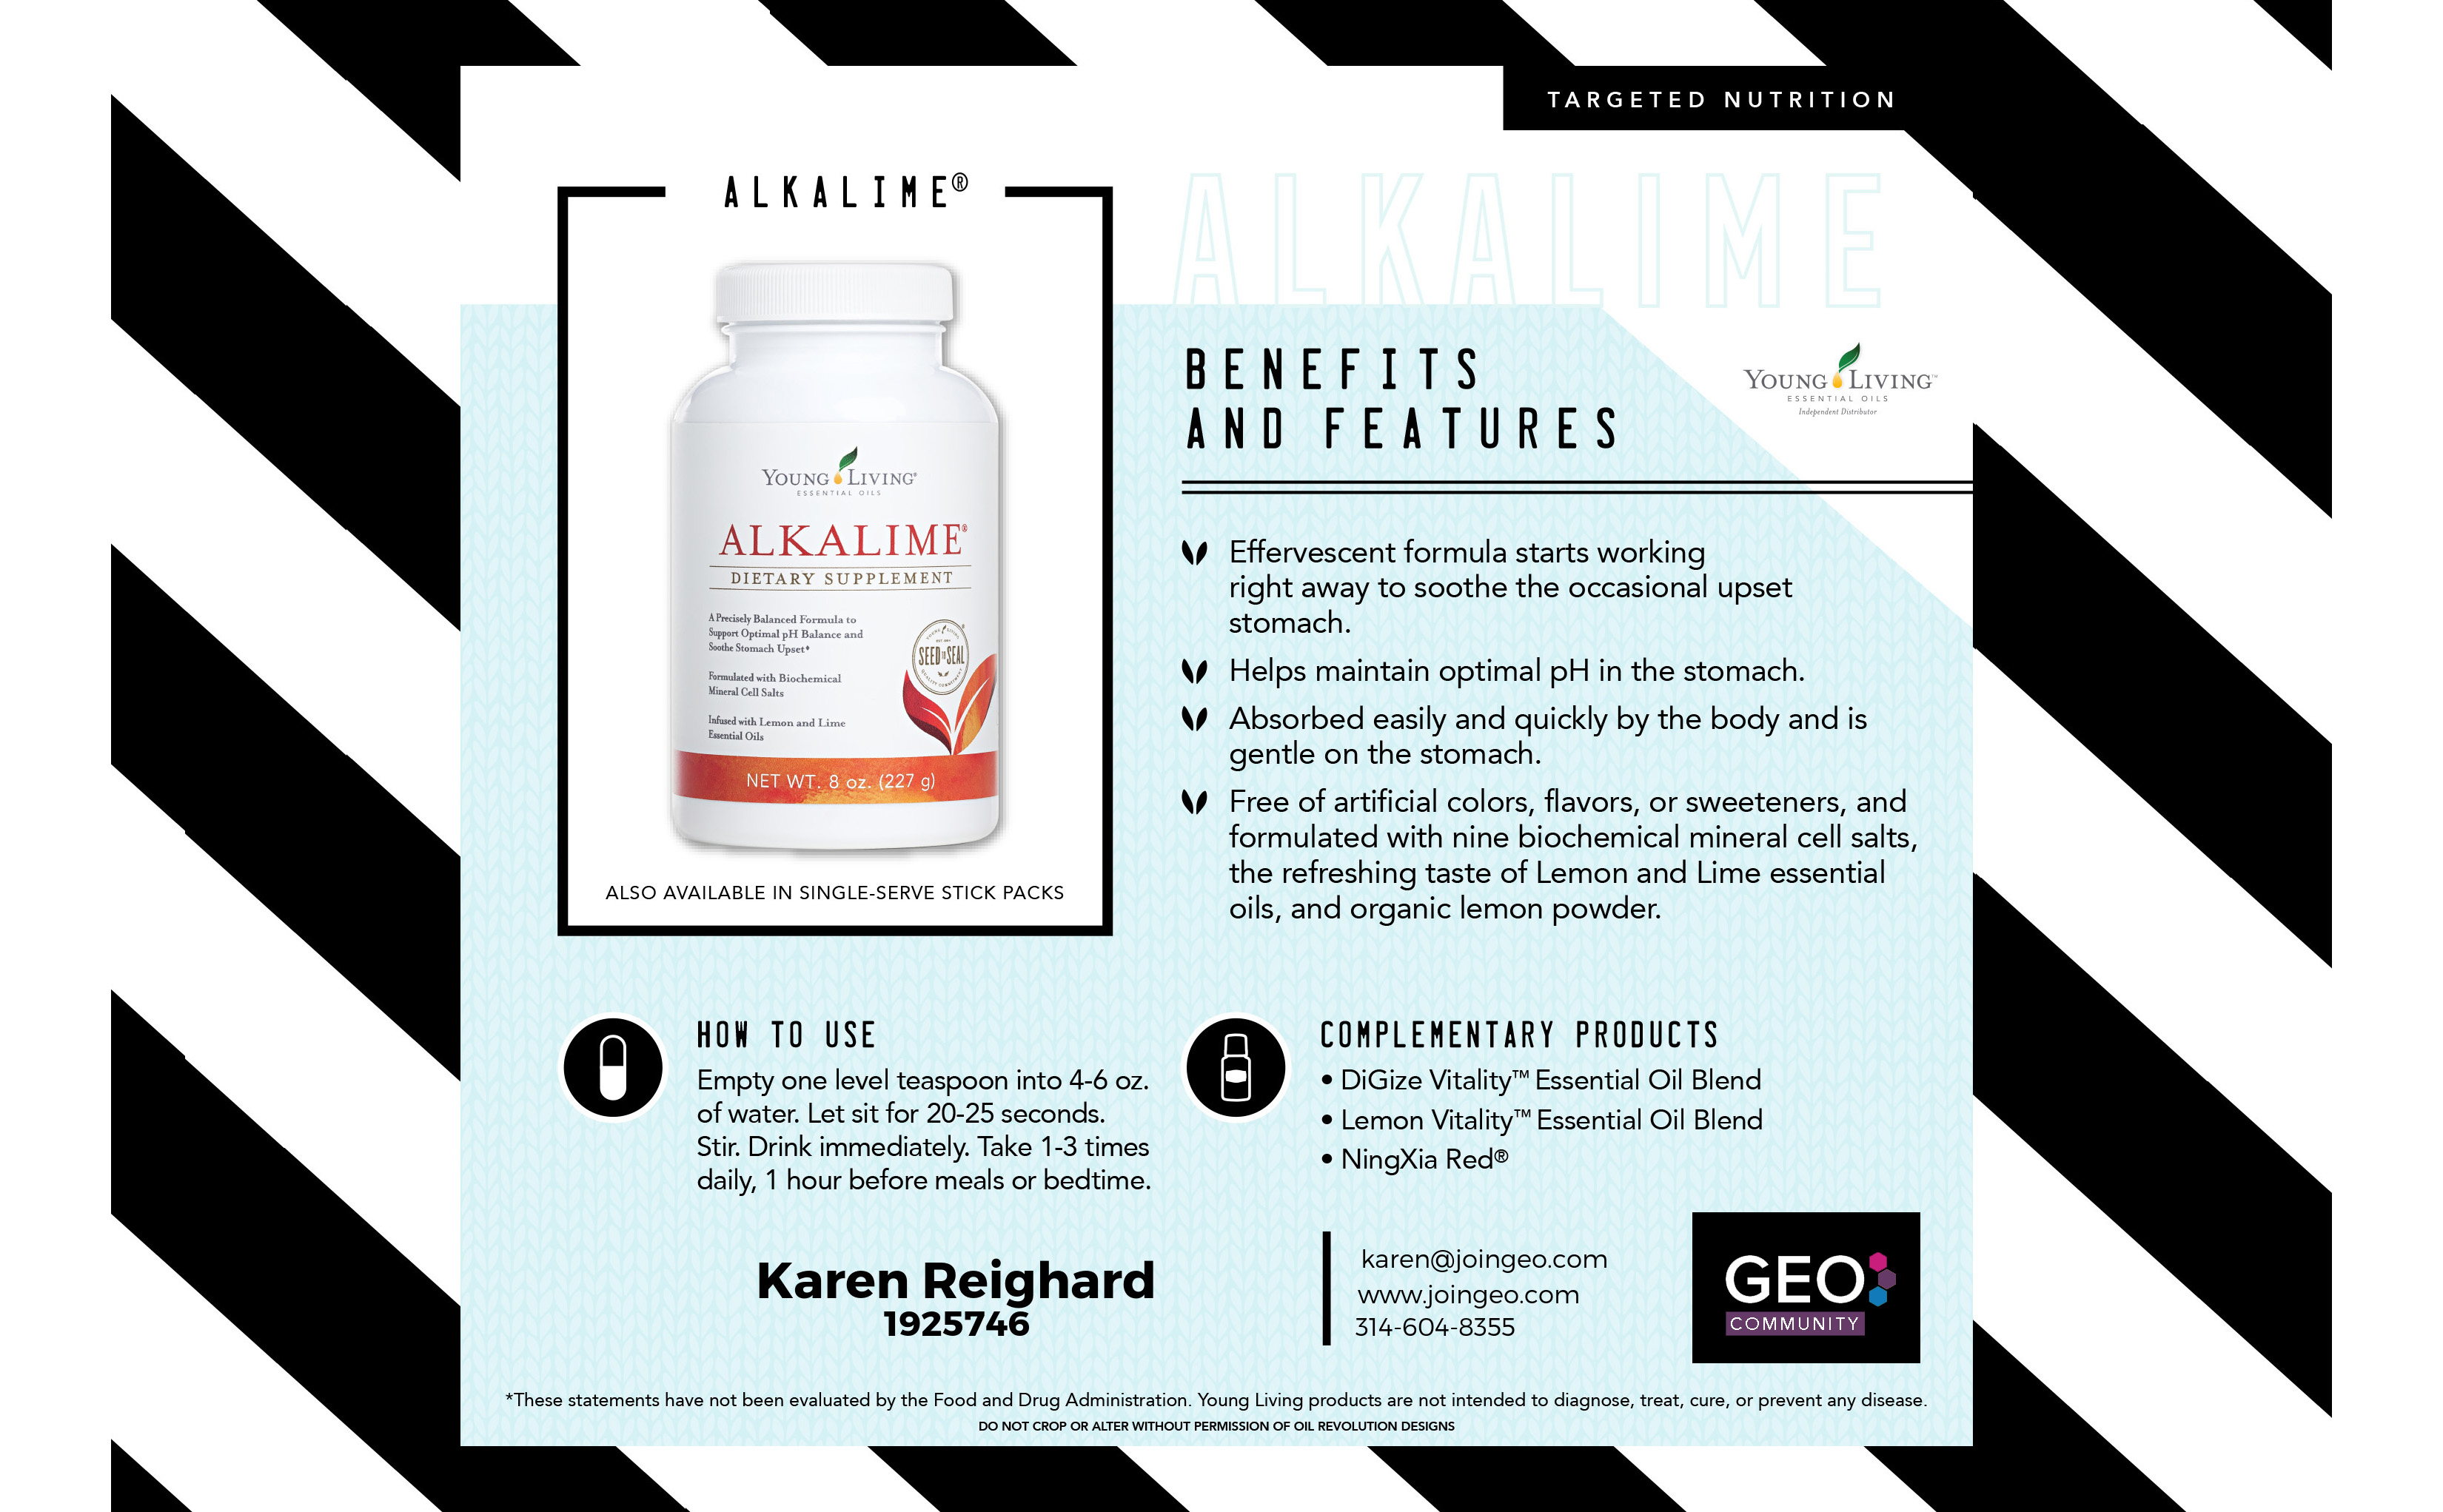 Need to Soothe an Upset Stomach – Try Alkalime